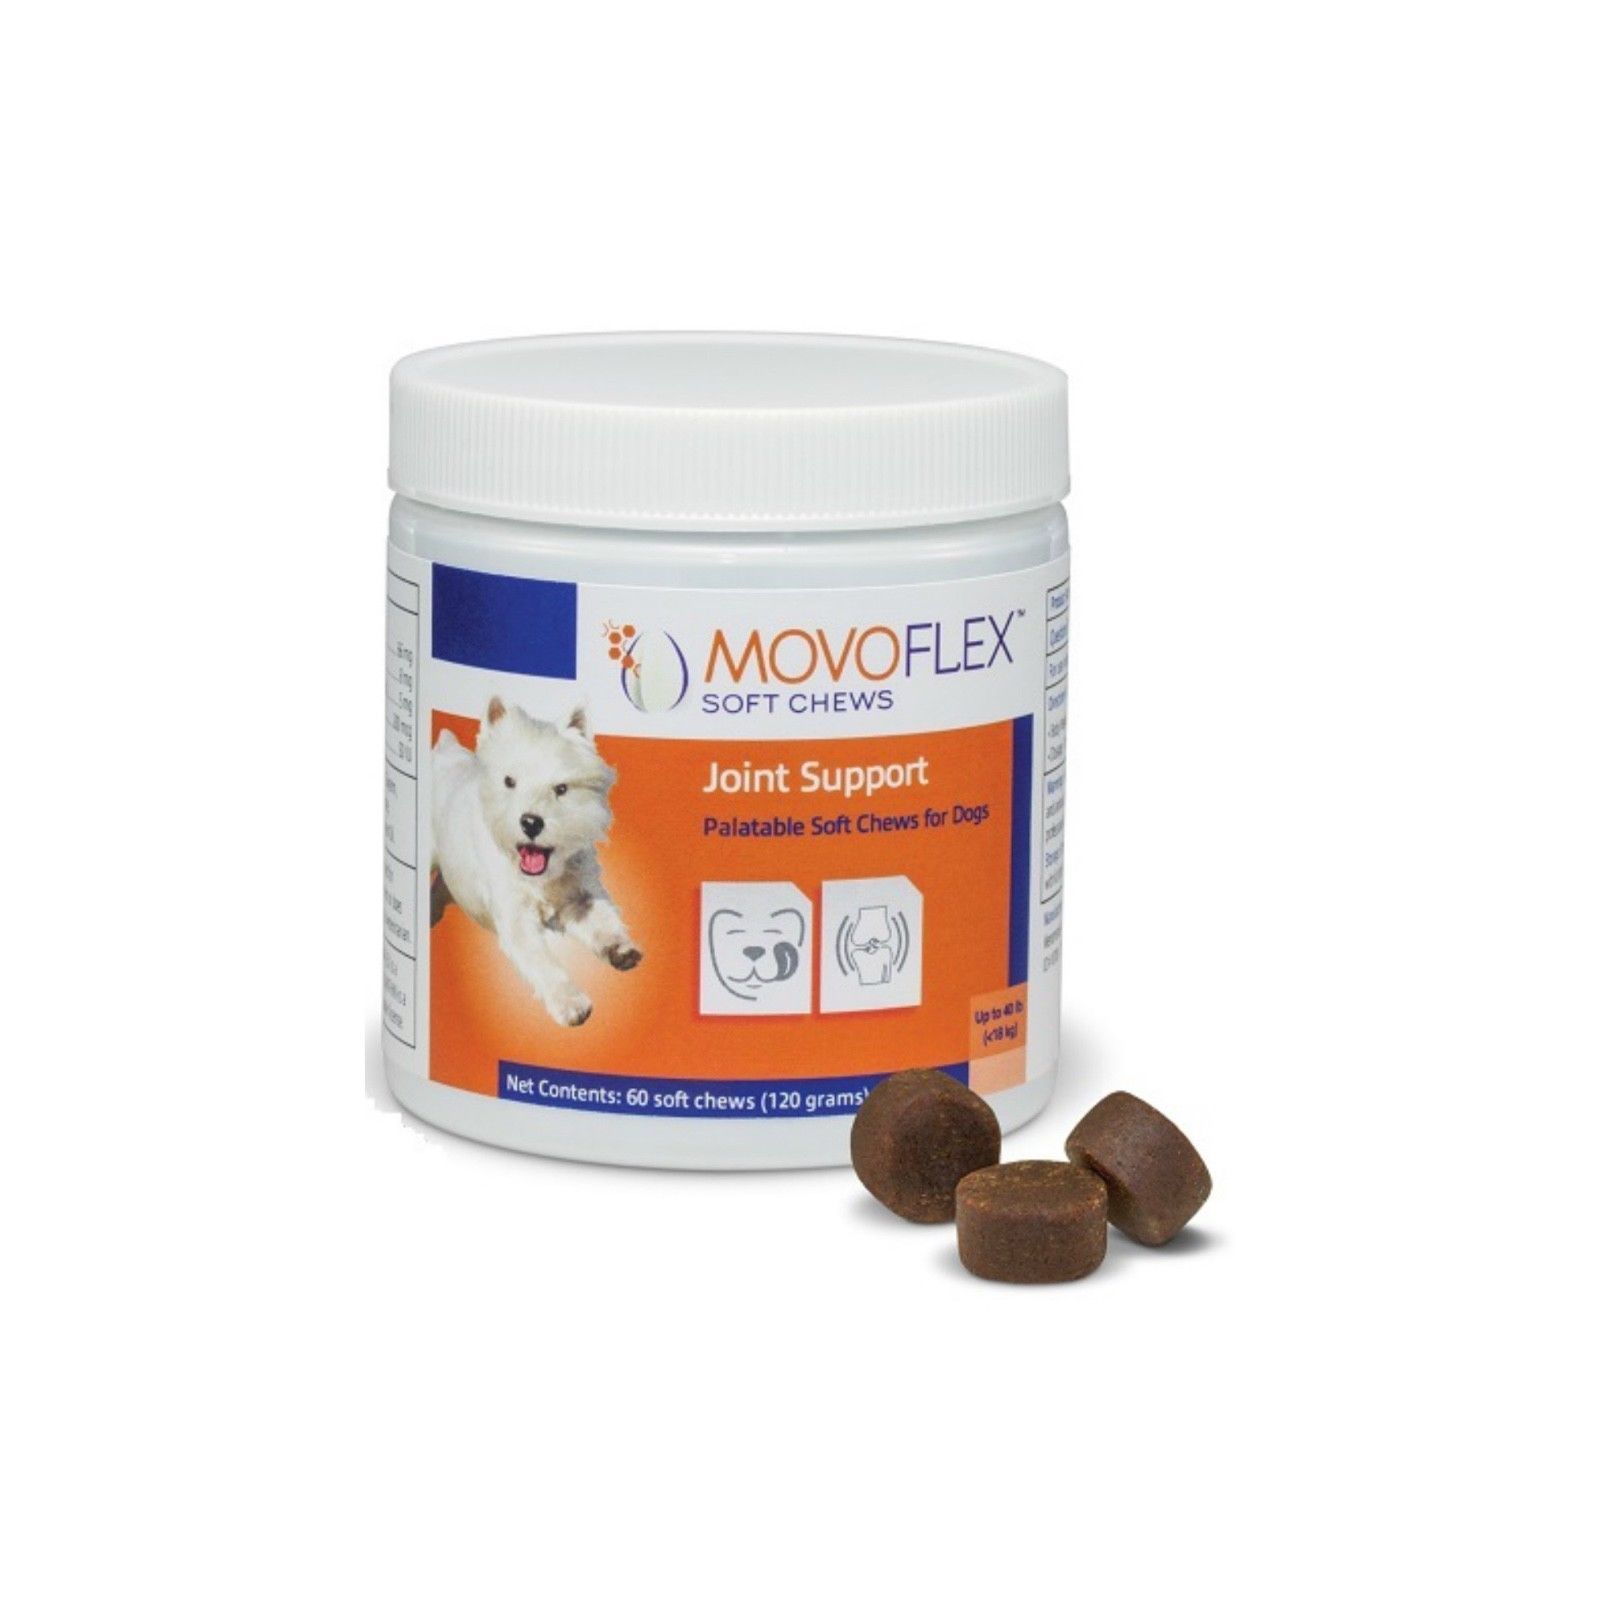 MoVoFlex Soft Chews Joint Support for Small Dogs up to 40 lbs. 60 Soft Chews